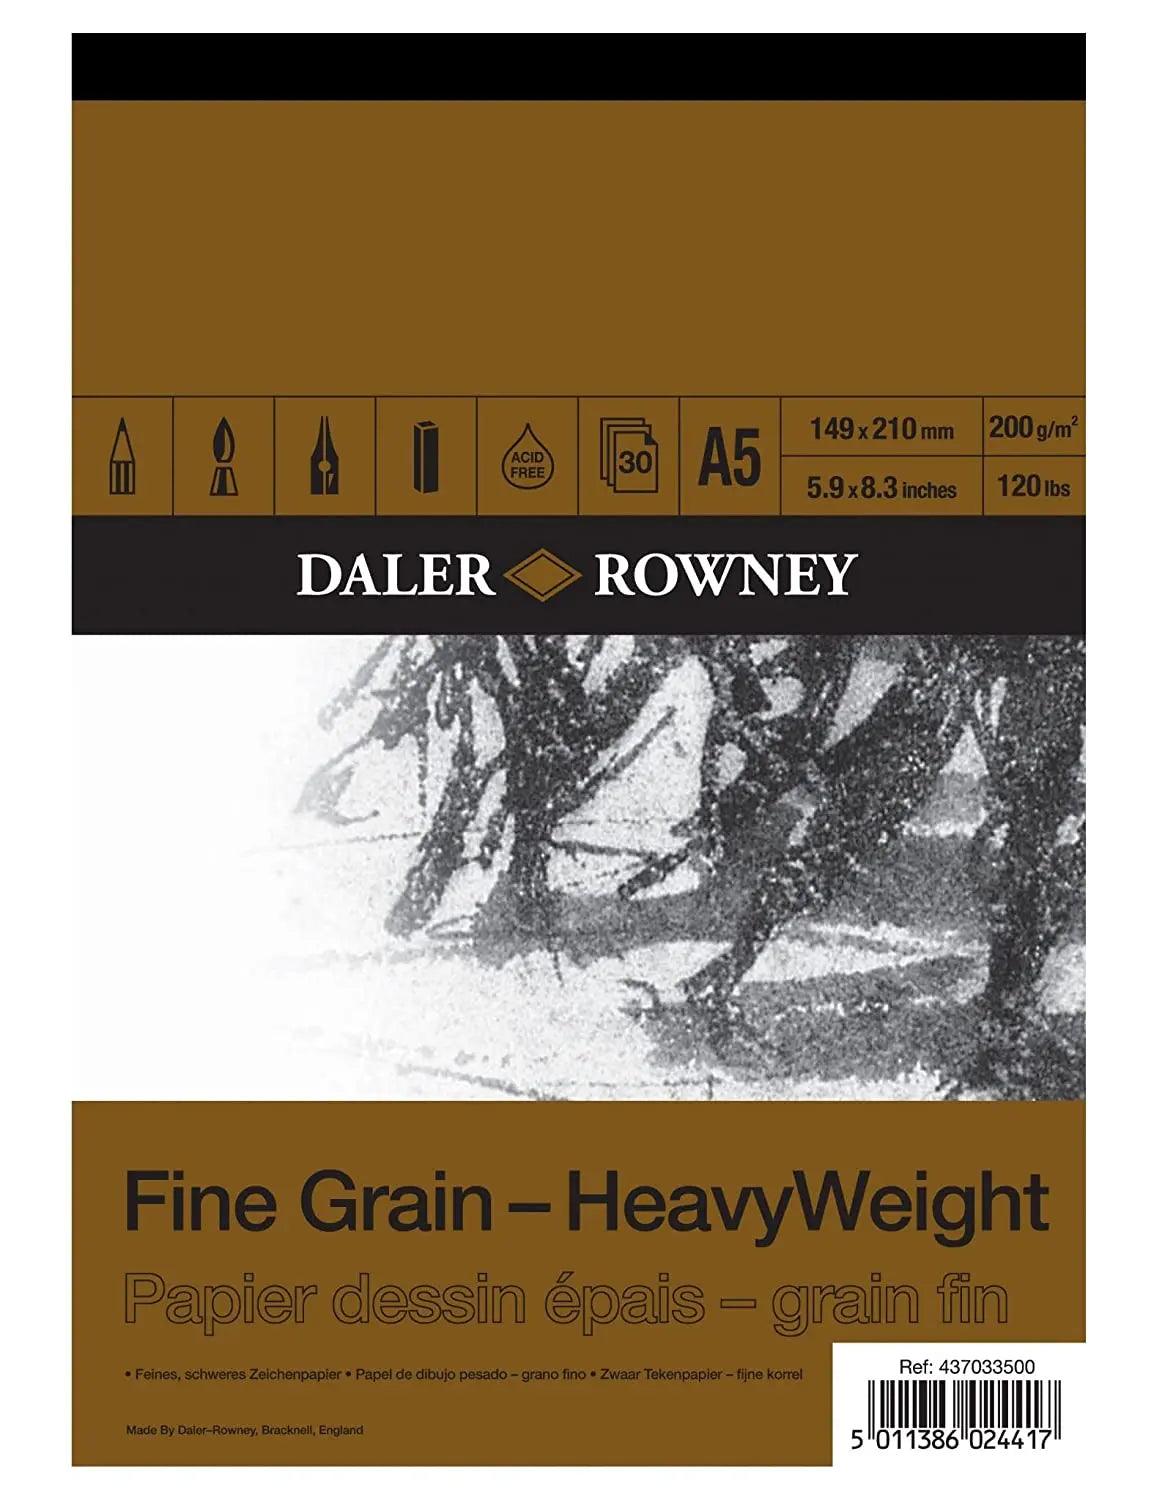 Daler Rowney Fine Grain Heavyweight Sketching & Drawing Pad The Stationers